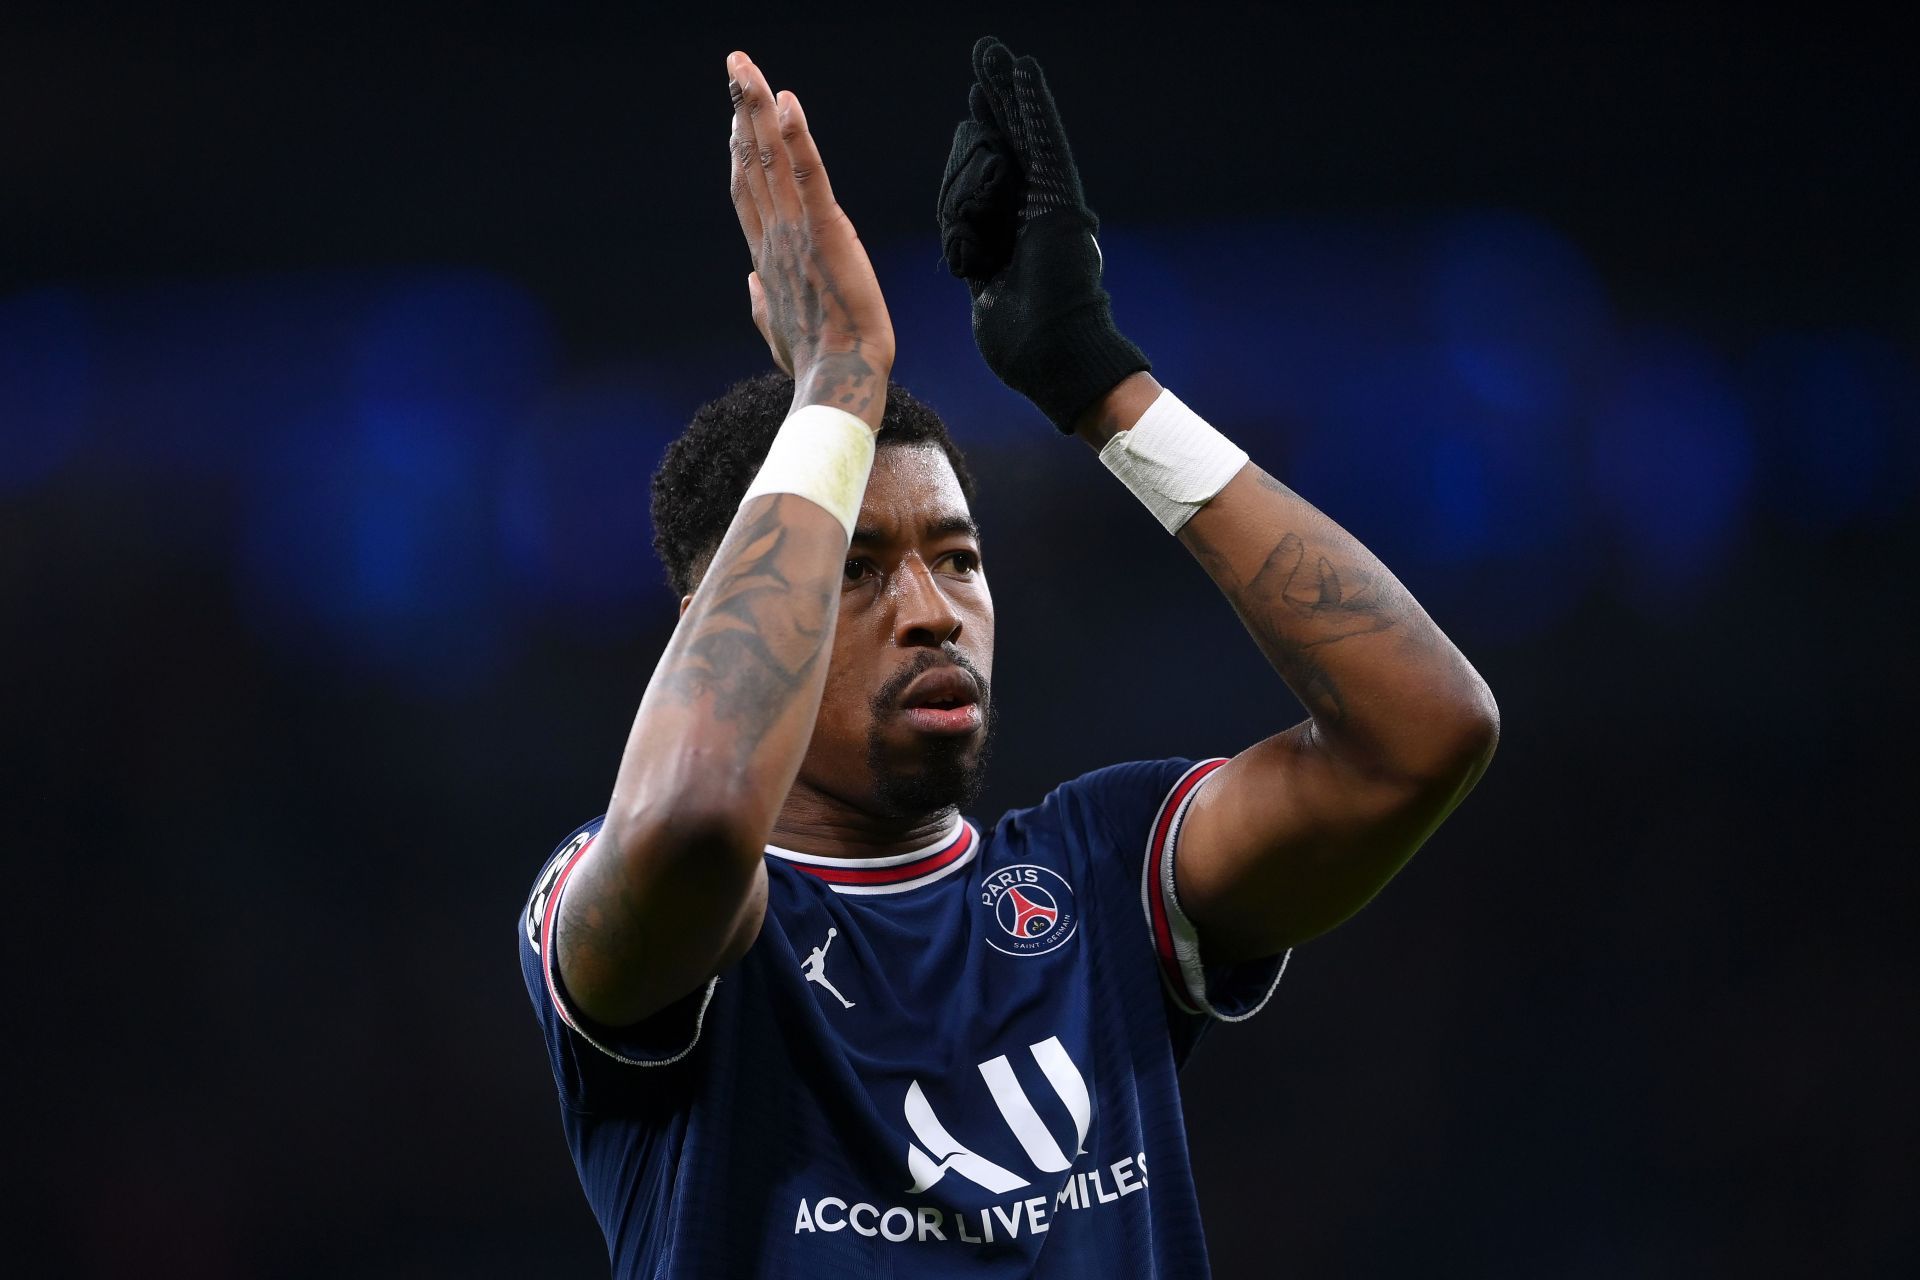 Presnel Kimpembe has no intention of leaving the Parc des Princes this summer.